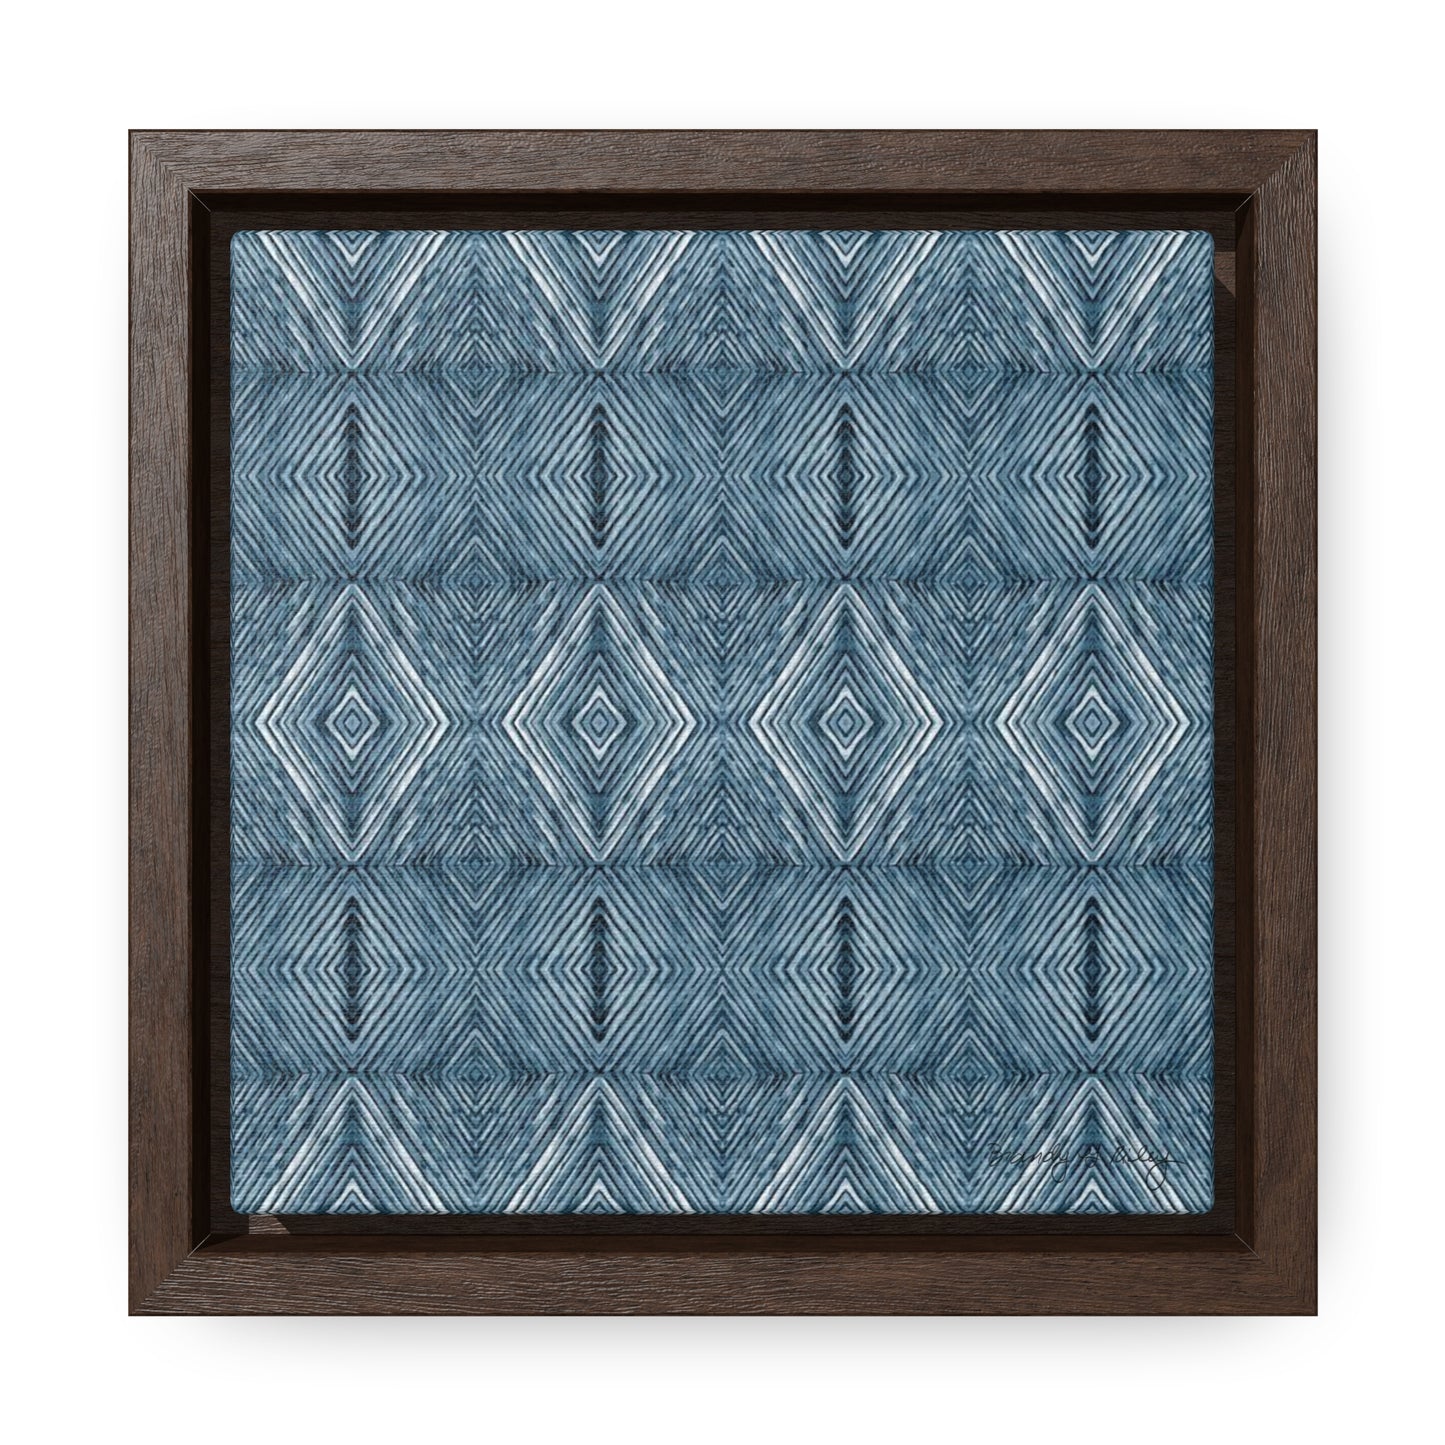 Mini framed artist canvas featuring a blue abstract diamond pattern in a brown frame